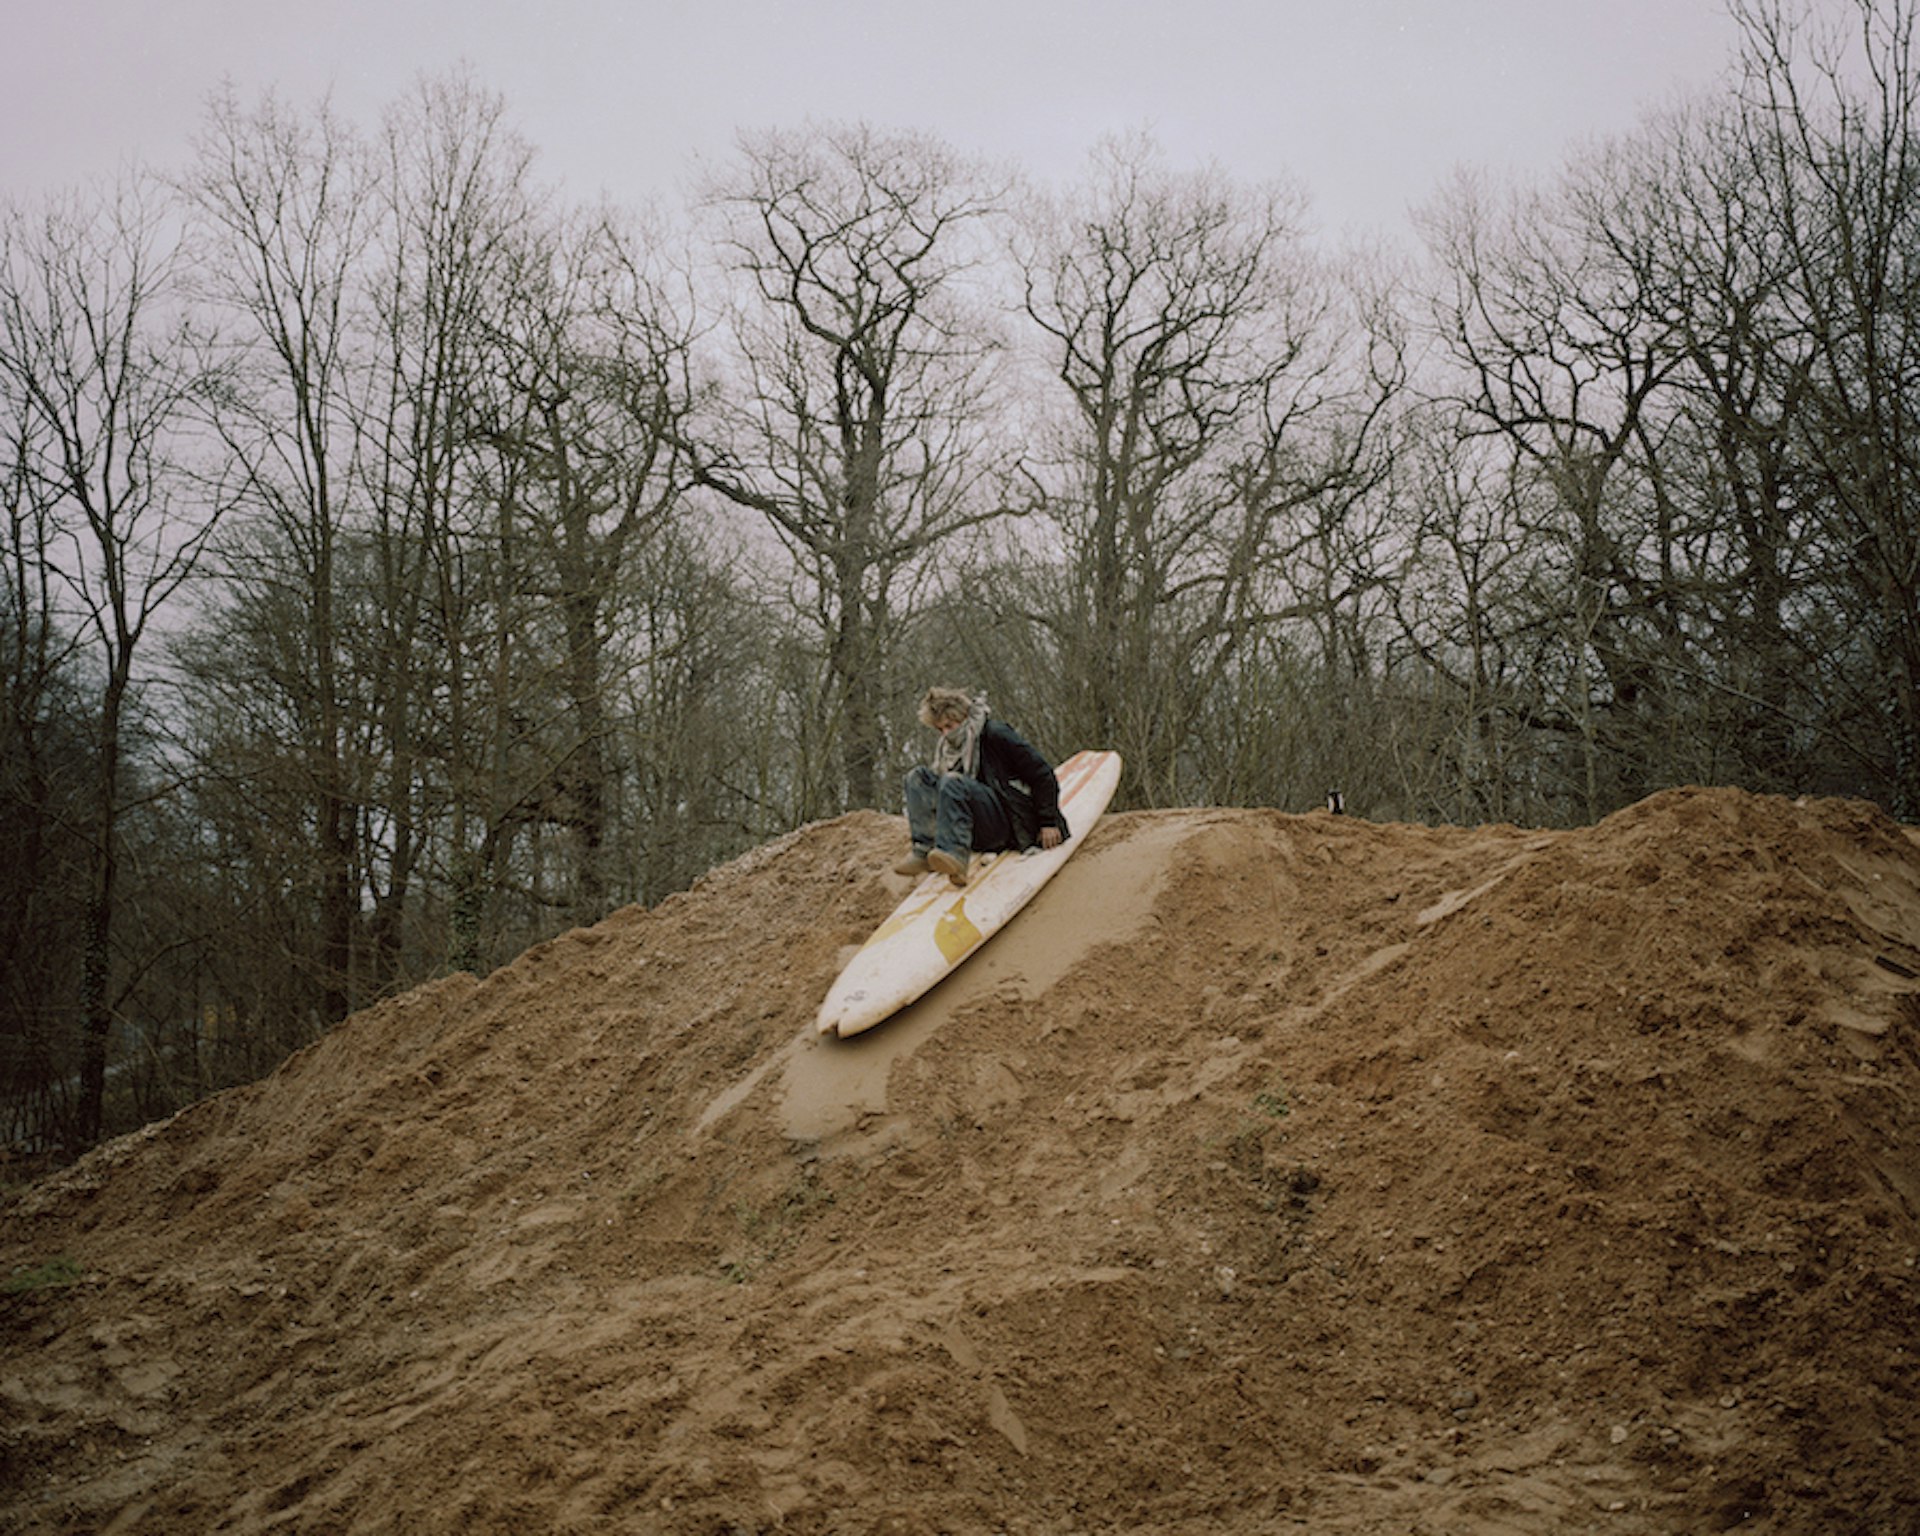 A figure slides down a pile of mud on a surfboard